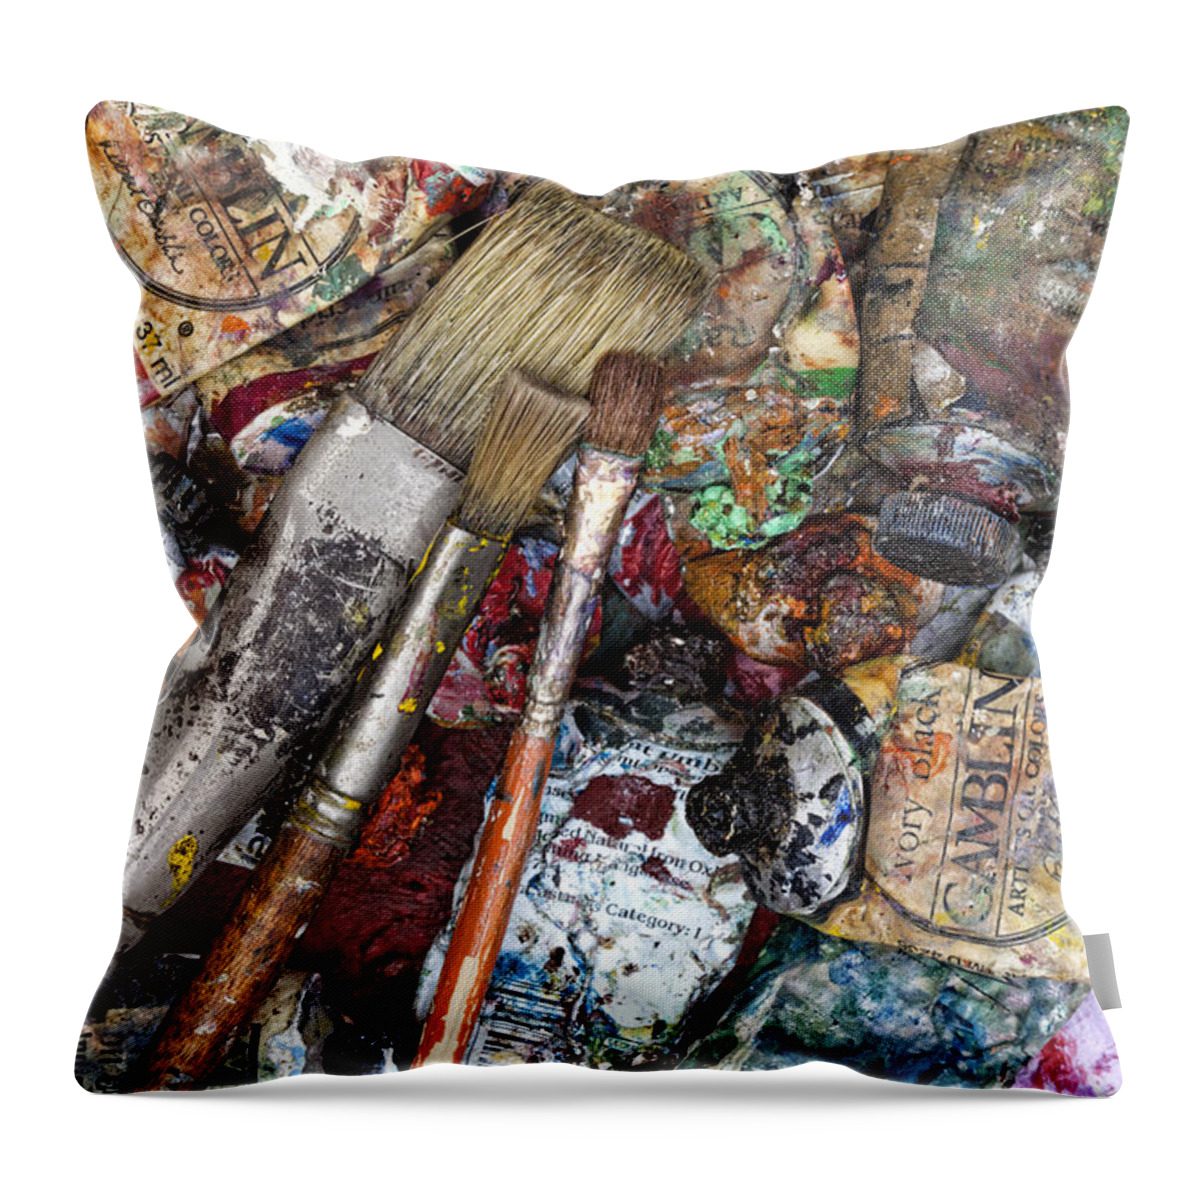 Art Throw Pillow featuring the photograph Art Is Messy 5 by Carol Leigh